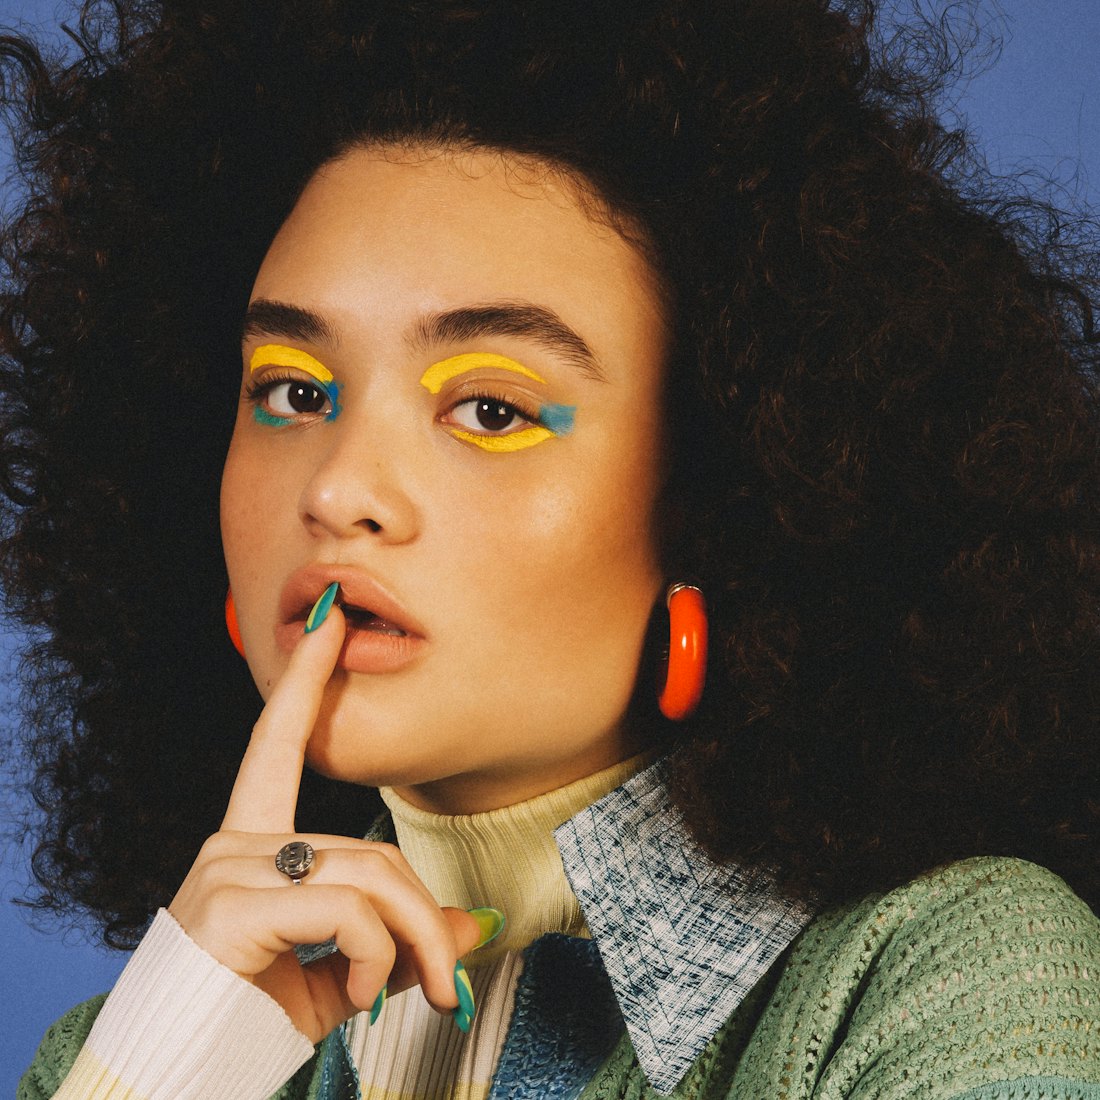 Diana Veras with yellow and blue eye make-up showing off her long nails and orange hoop earrings